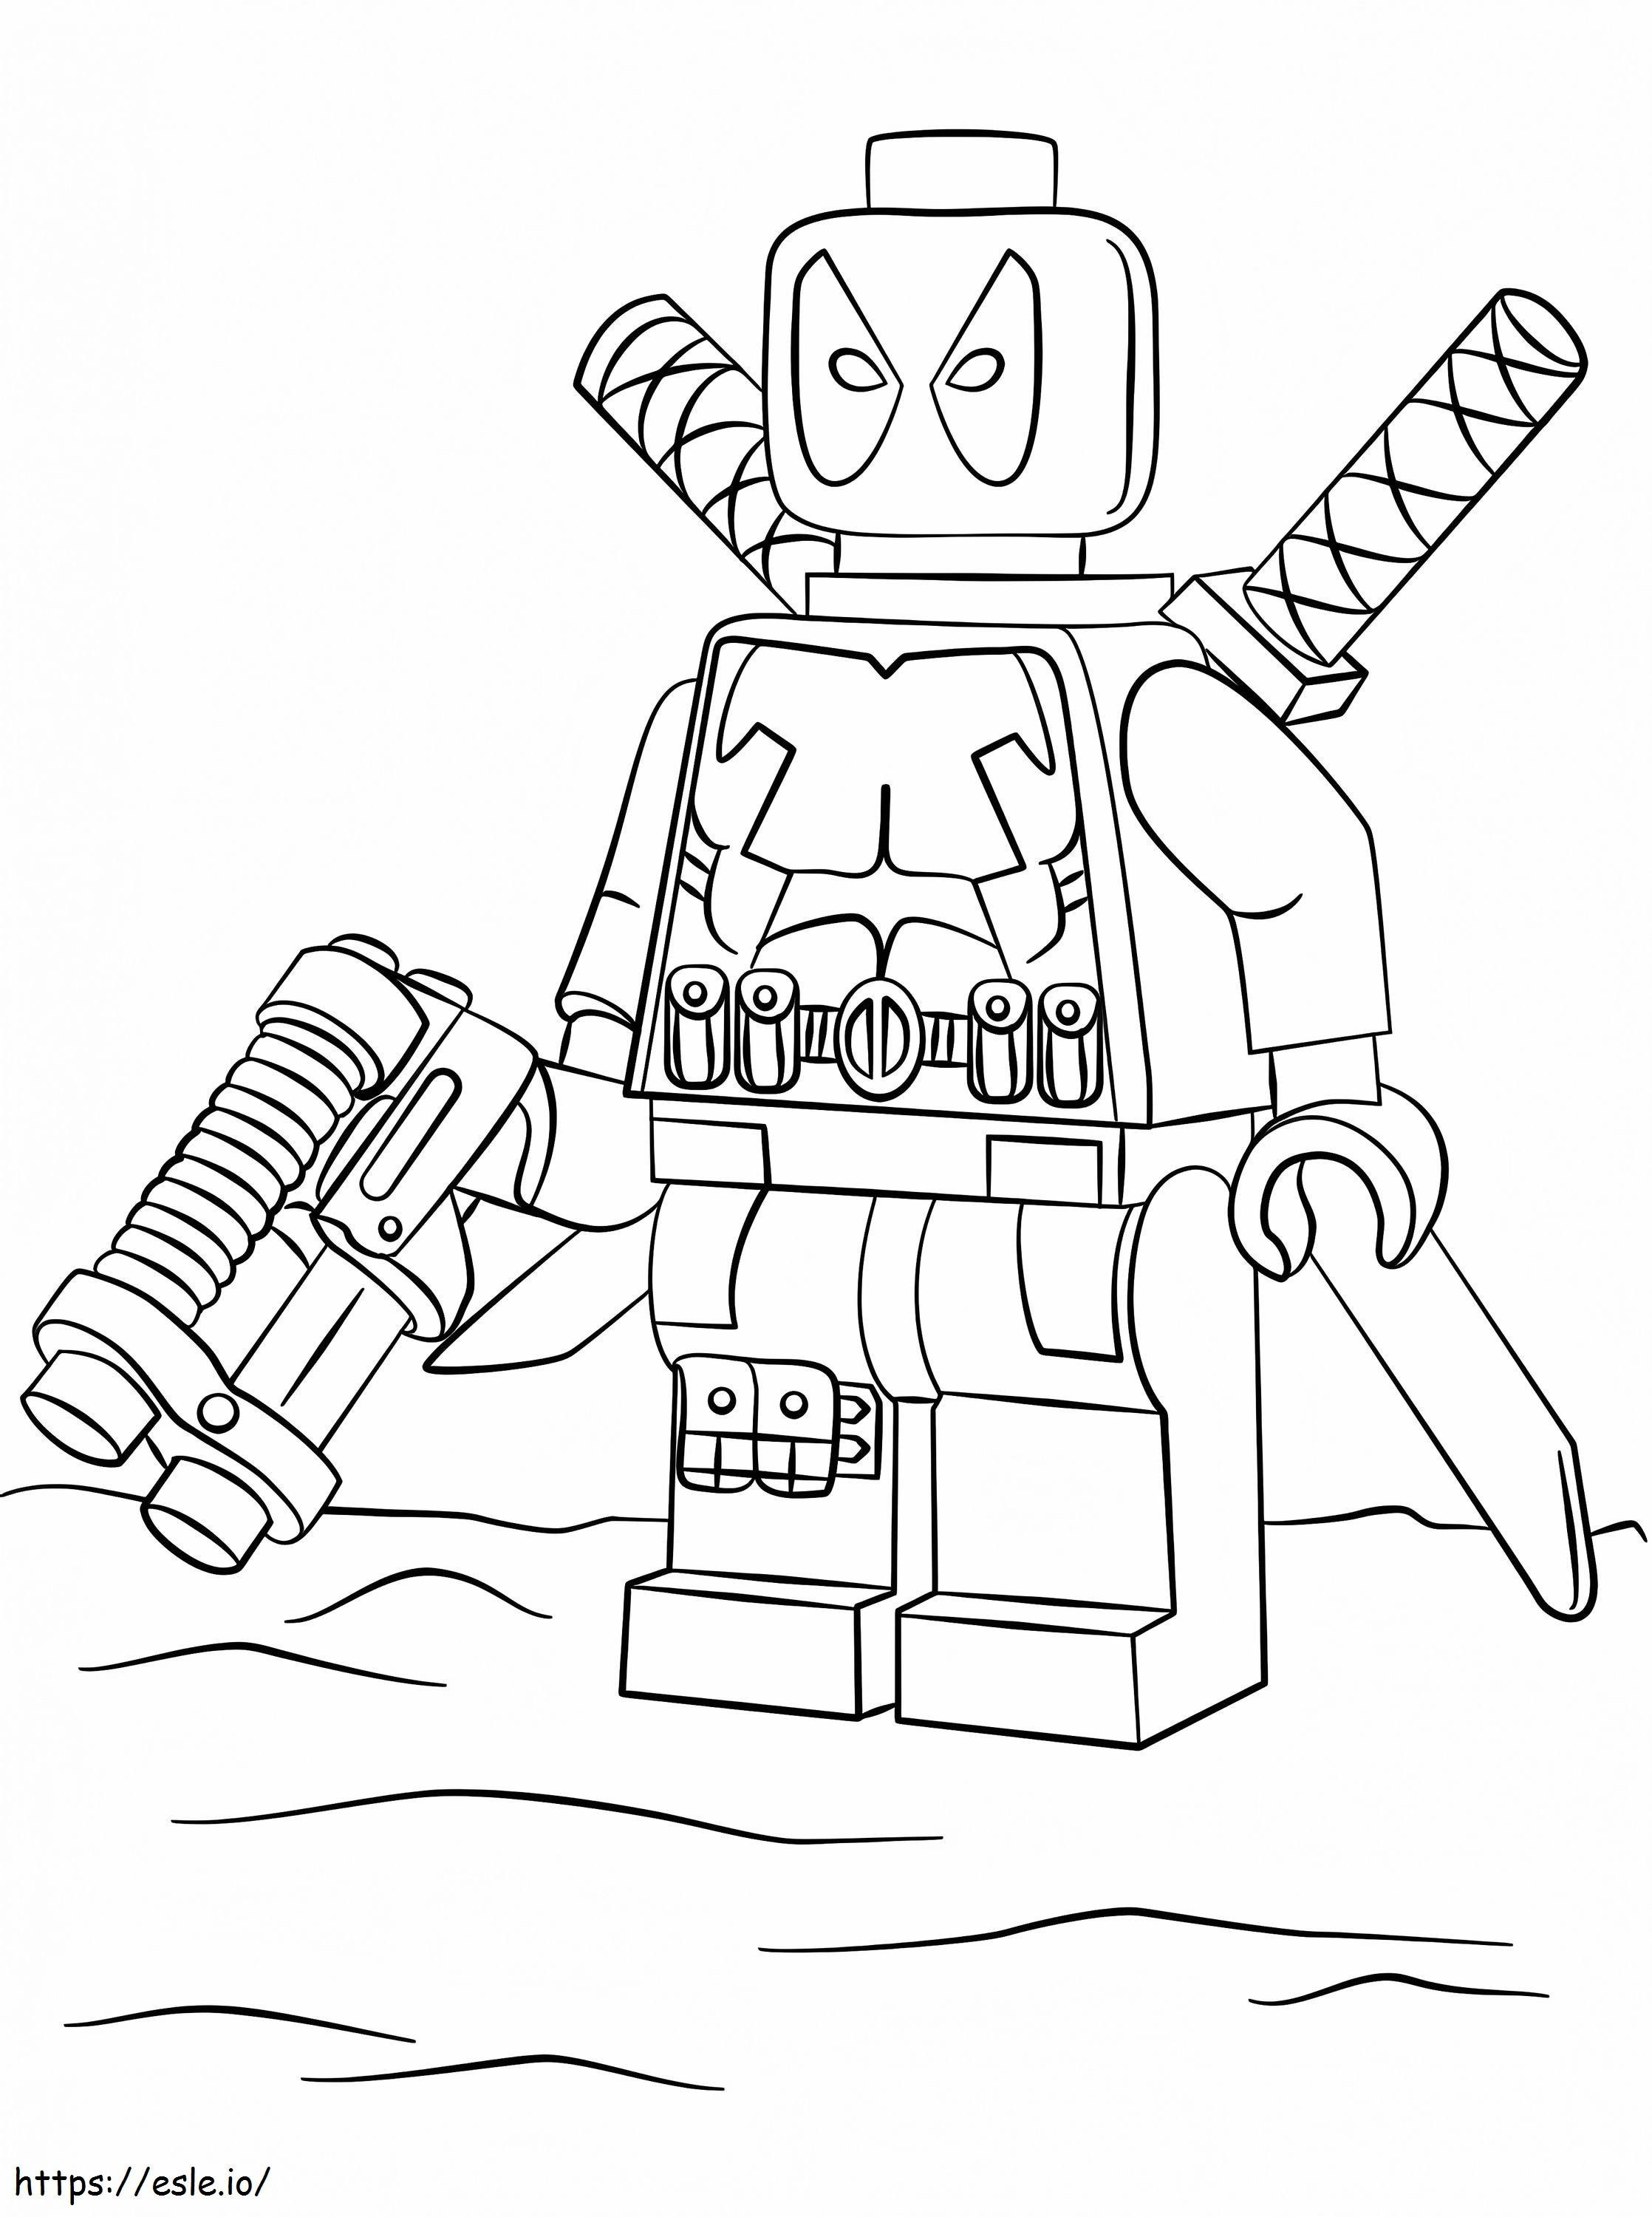 1562379108 Deadpool Lego A4 coloring page